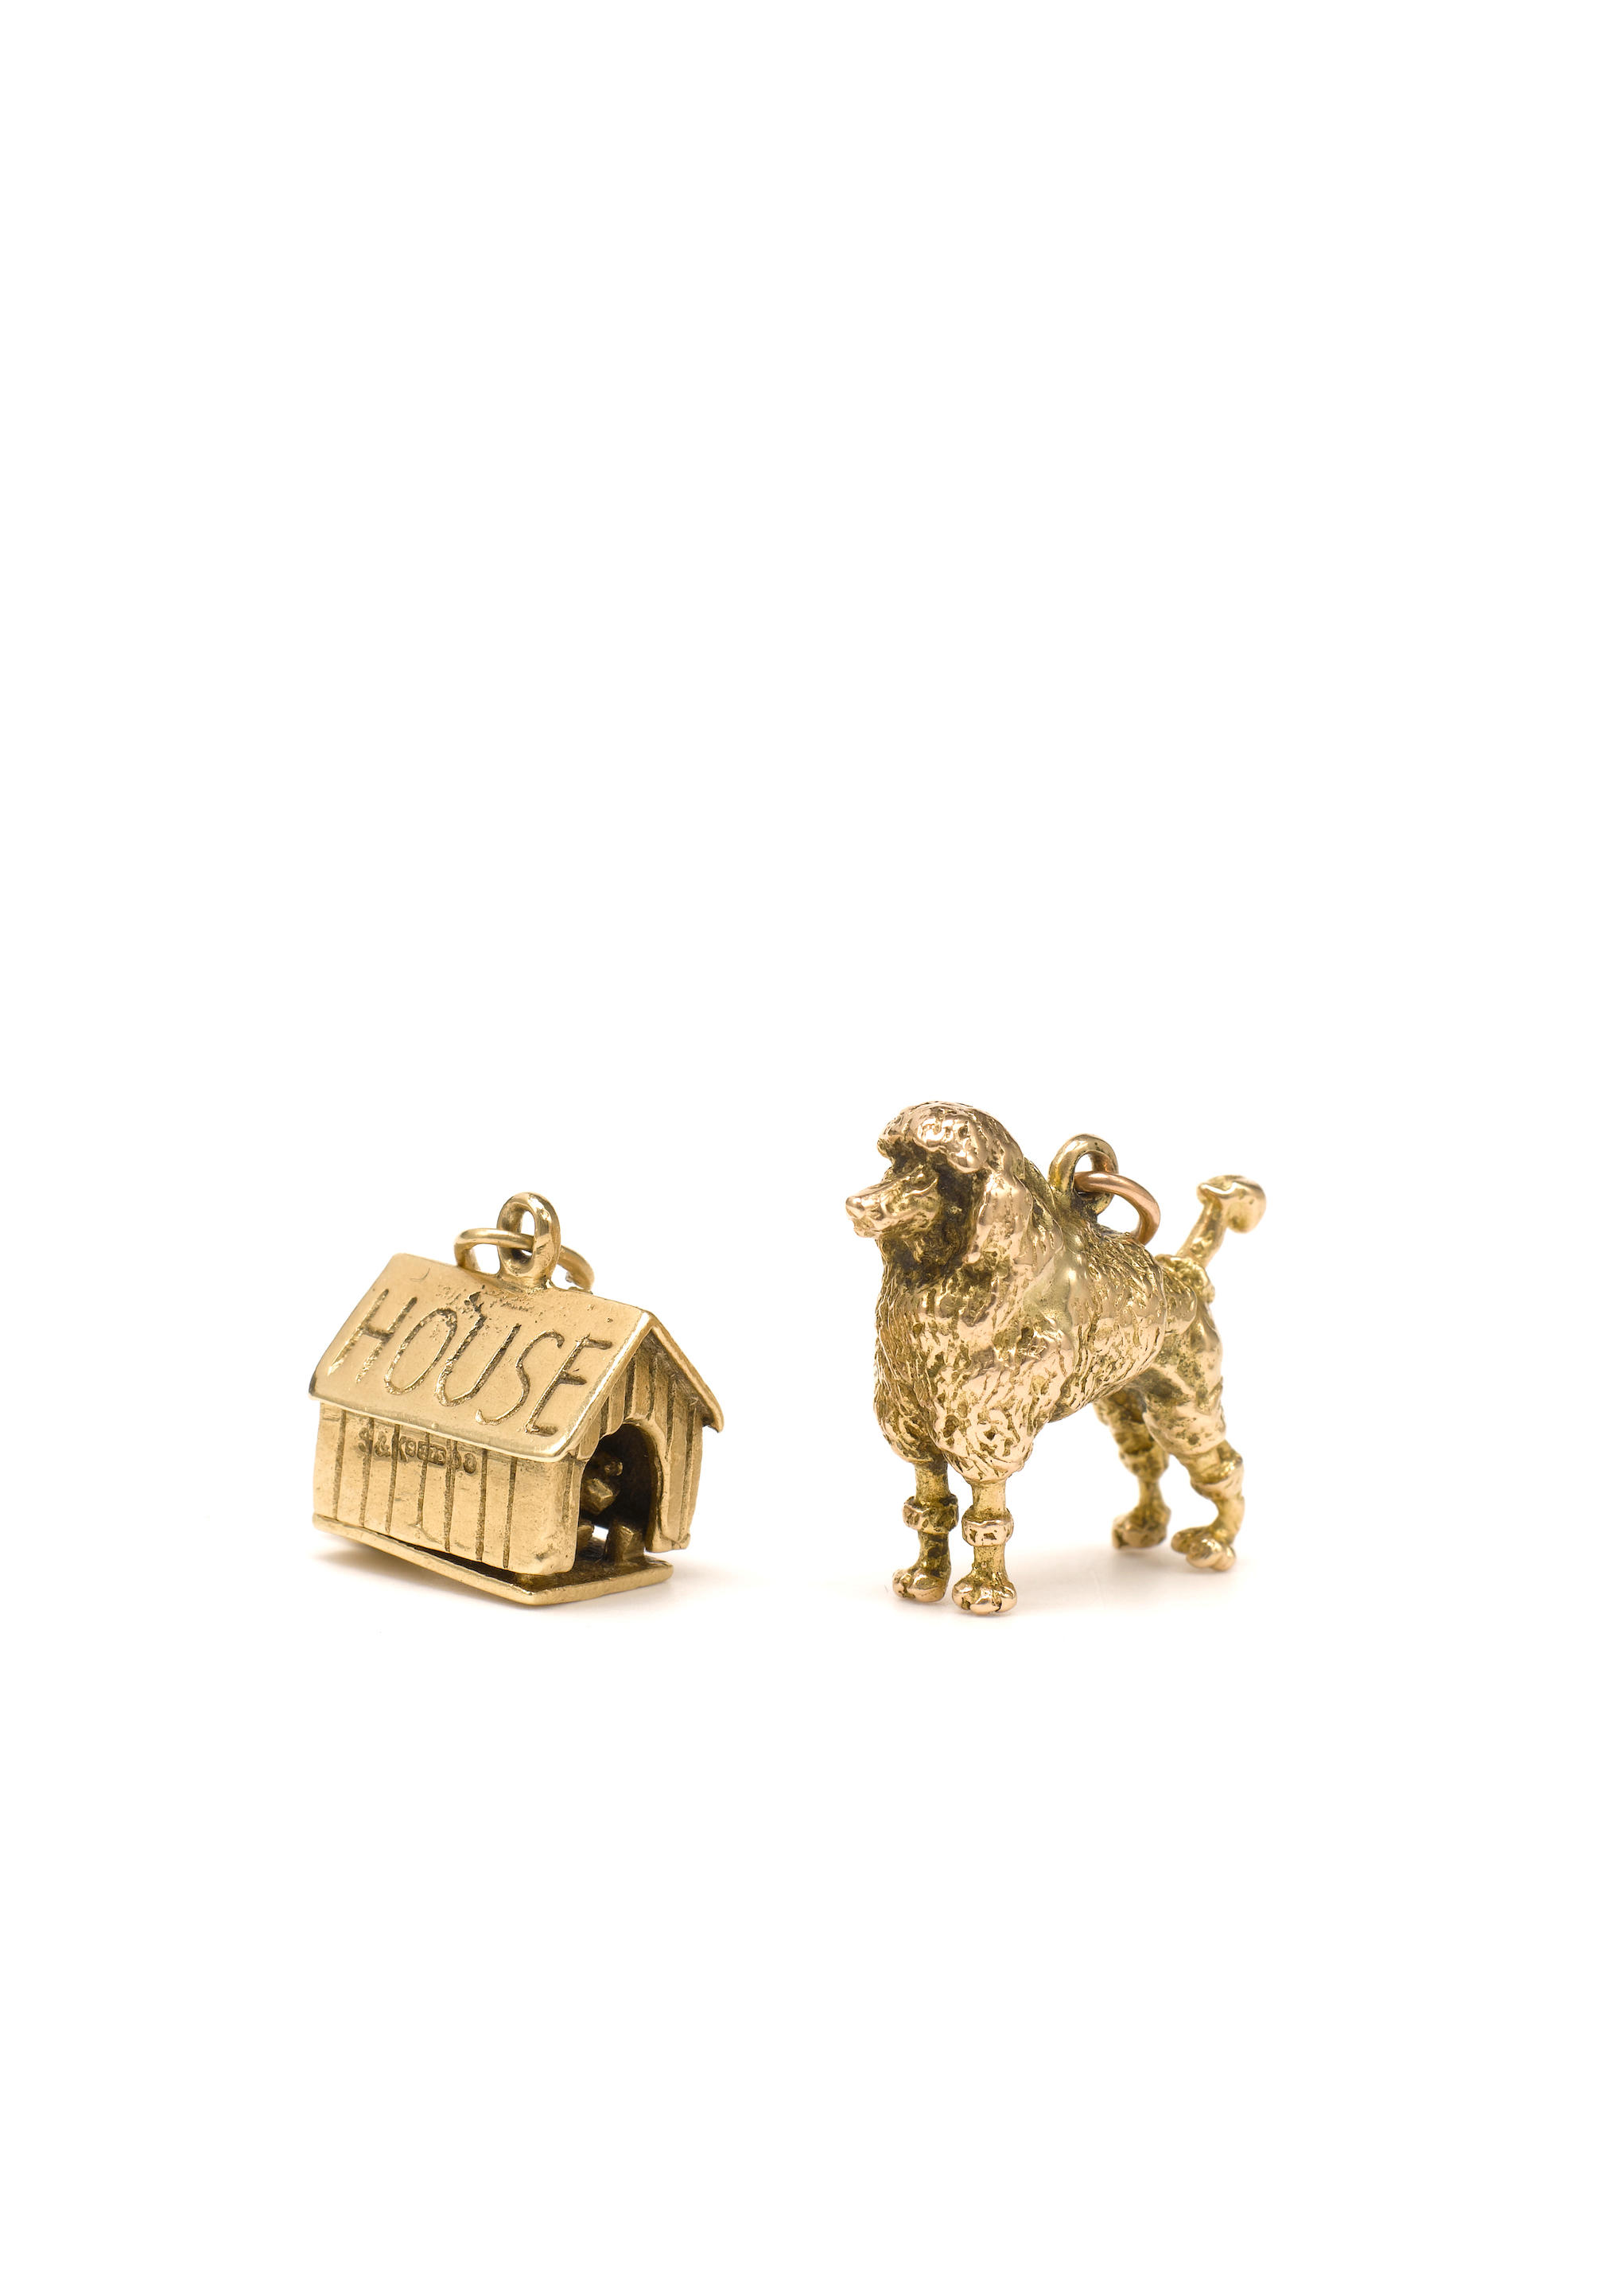 Two gold dog charms